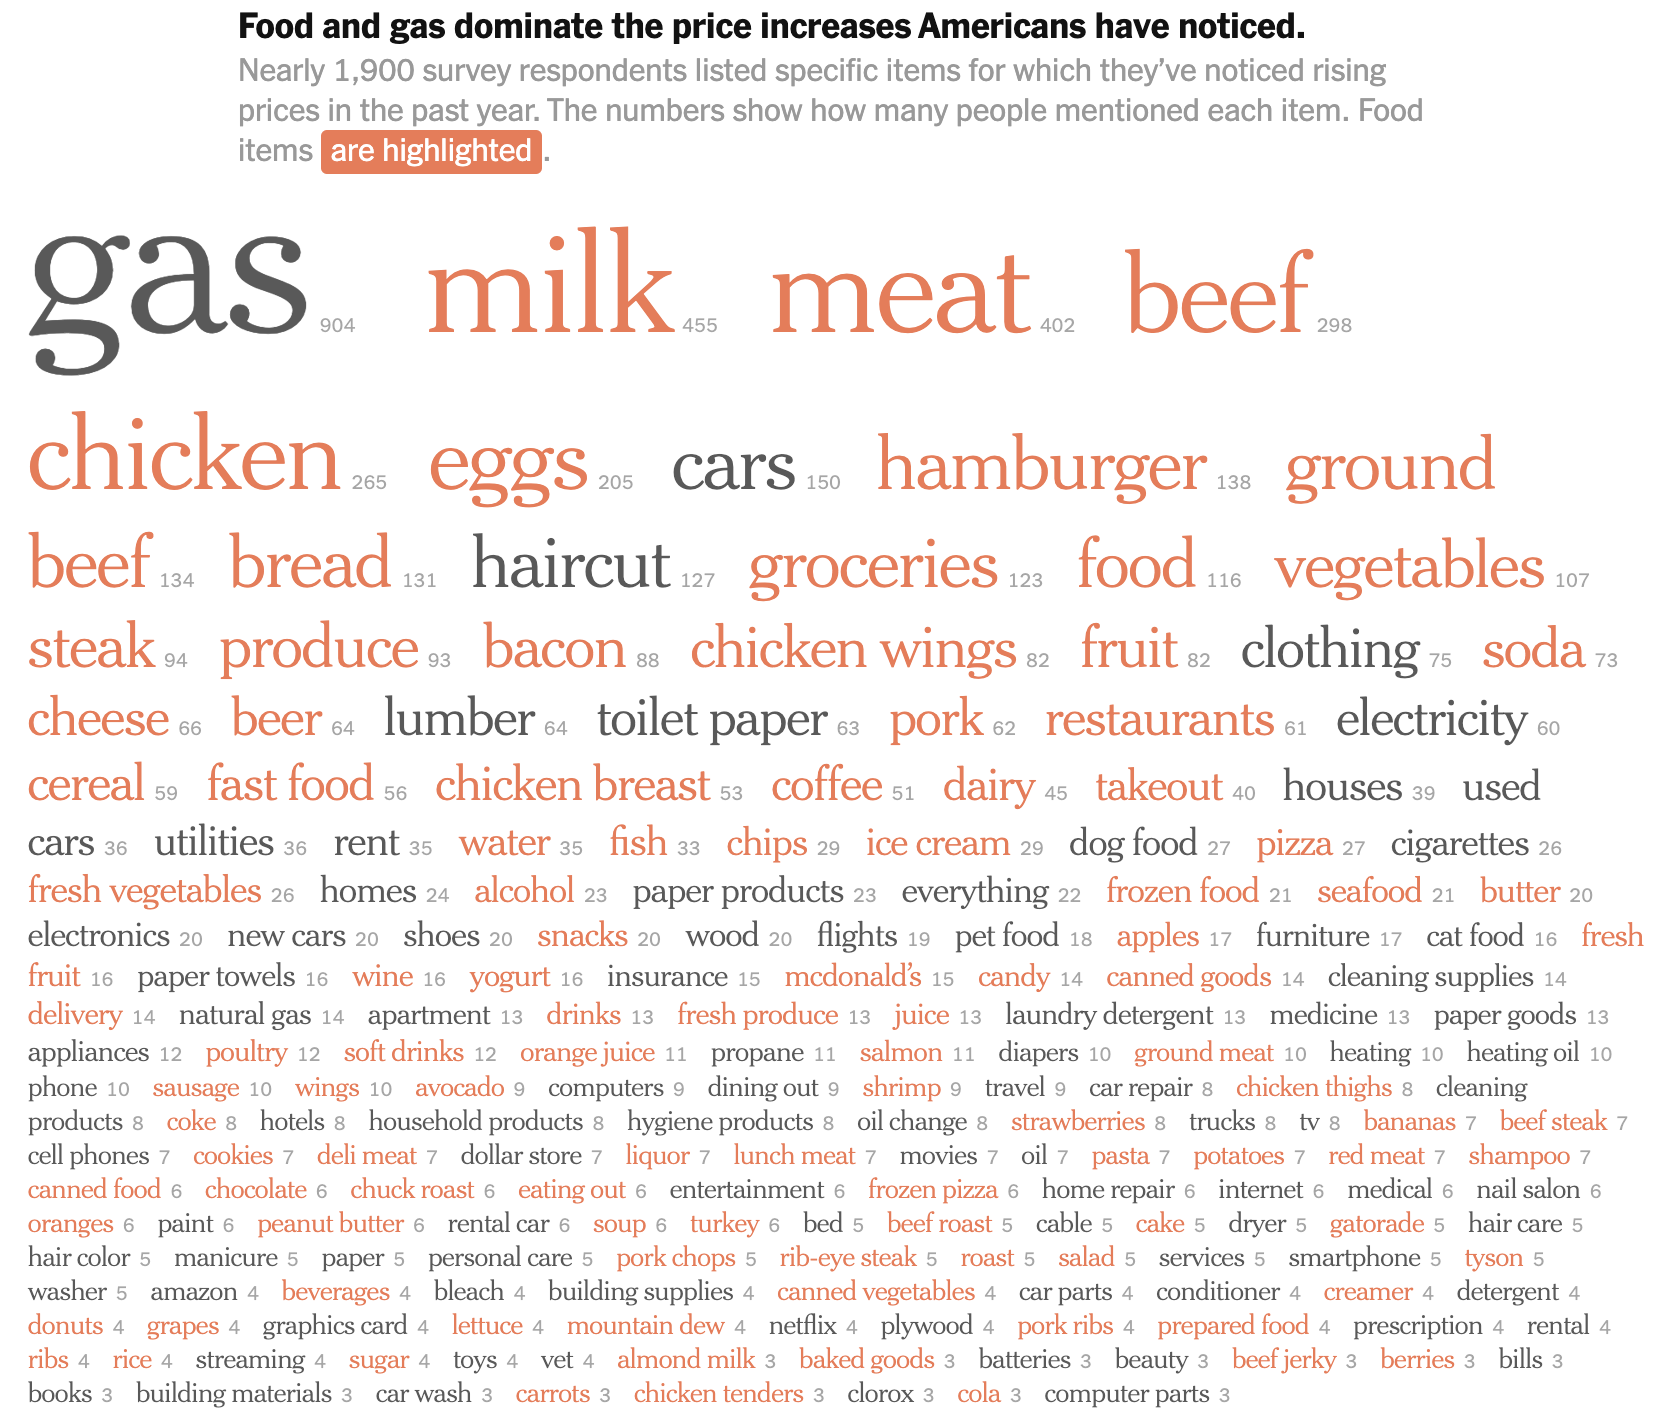 A word cloud showing the products that contribute to inflation, with food items highlighted in red